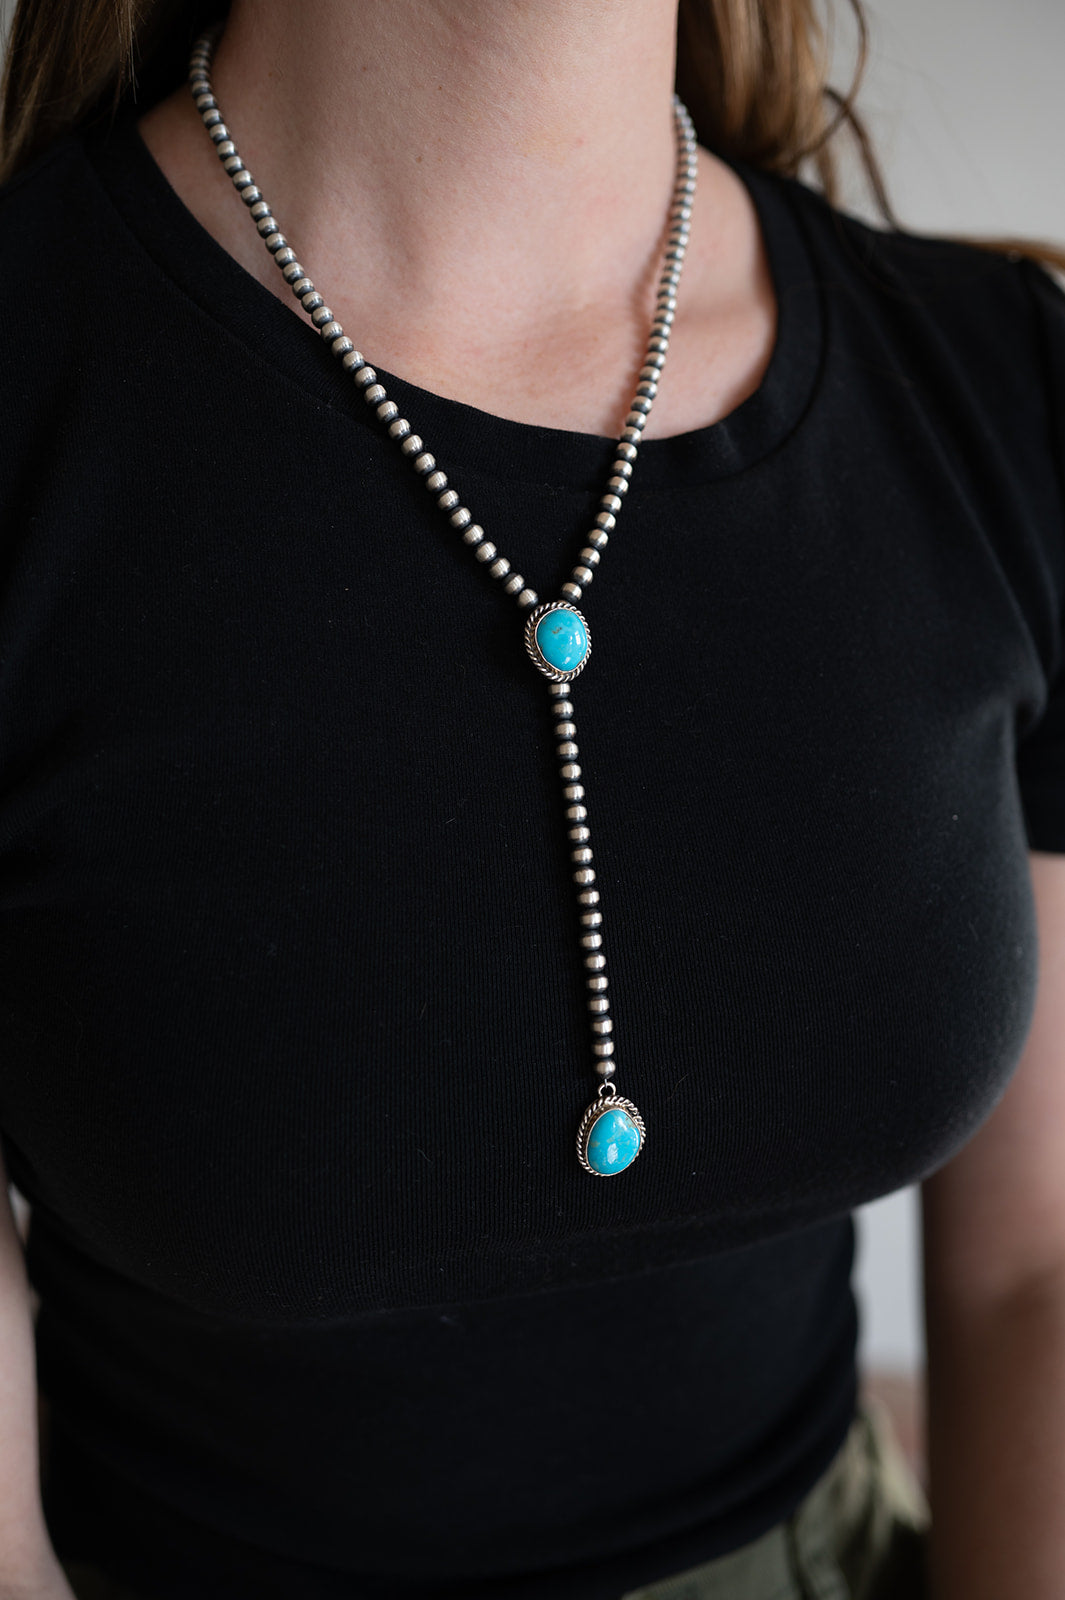 20" Turquoise Navajo Pearl Lariat Necklace